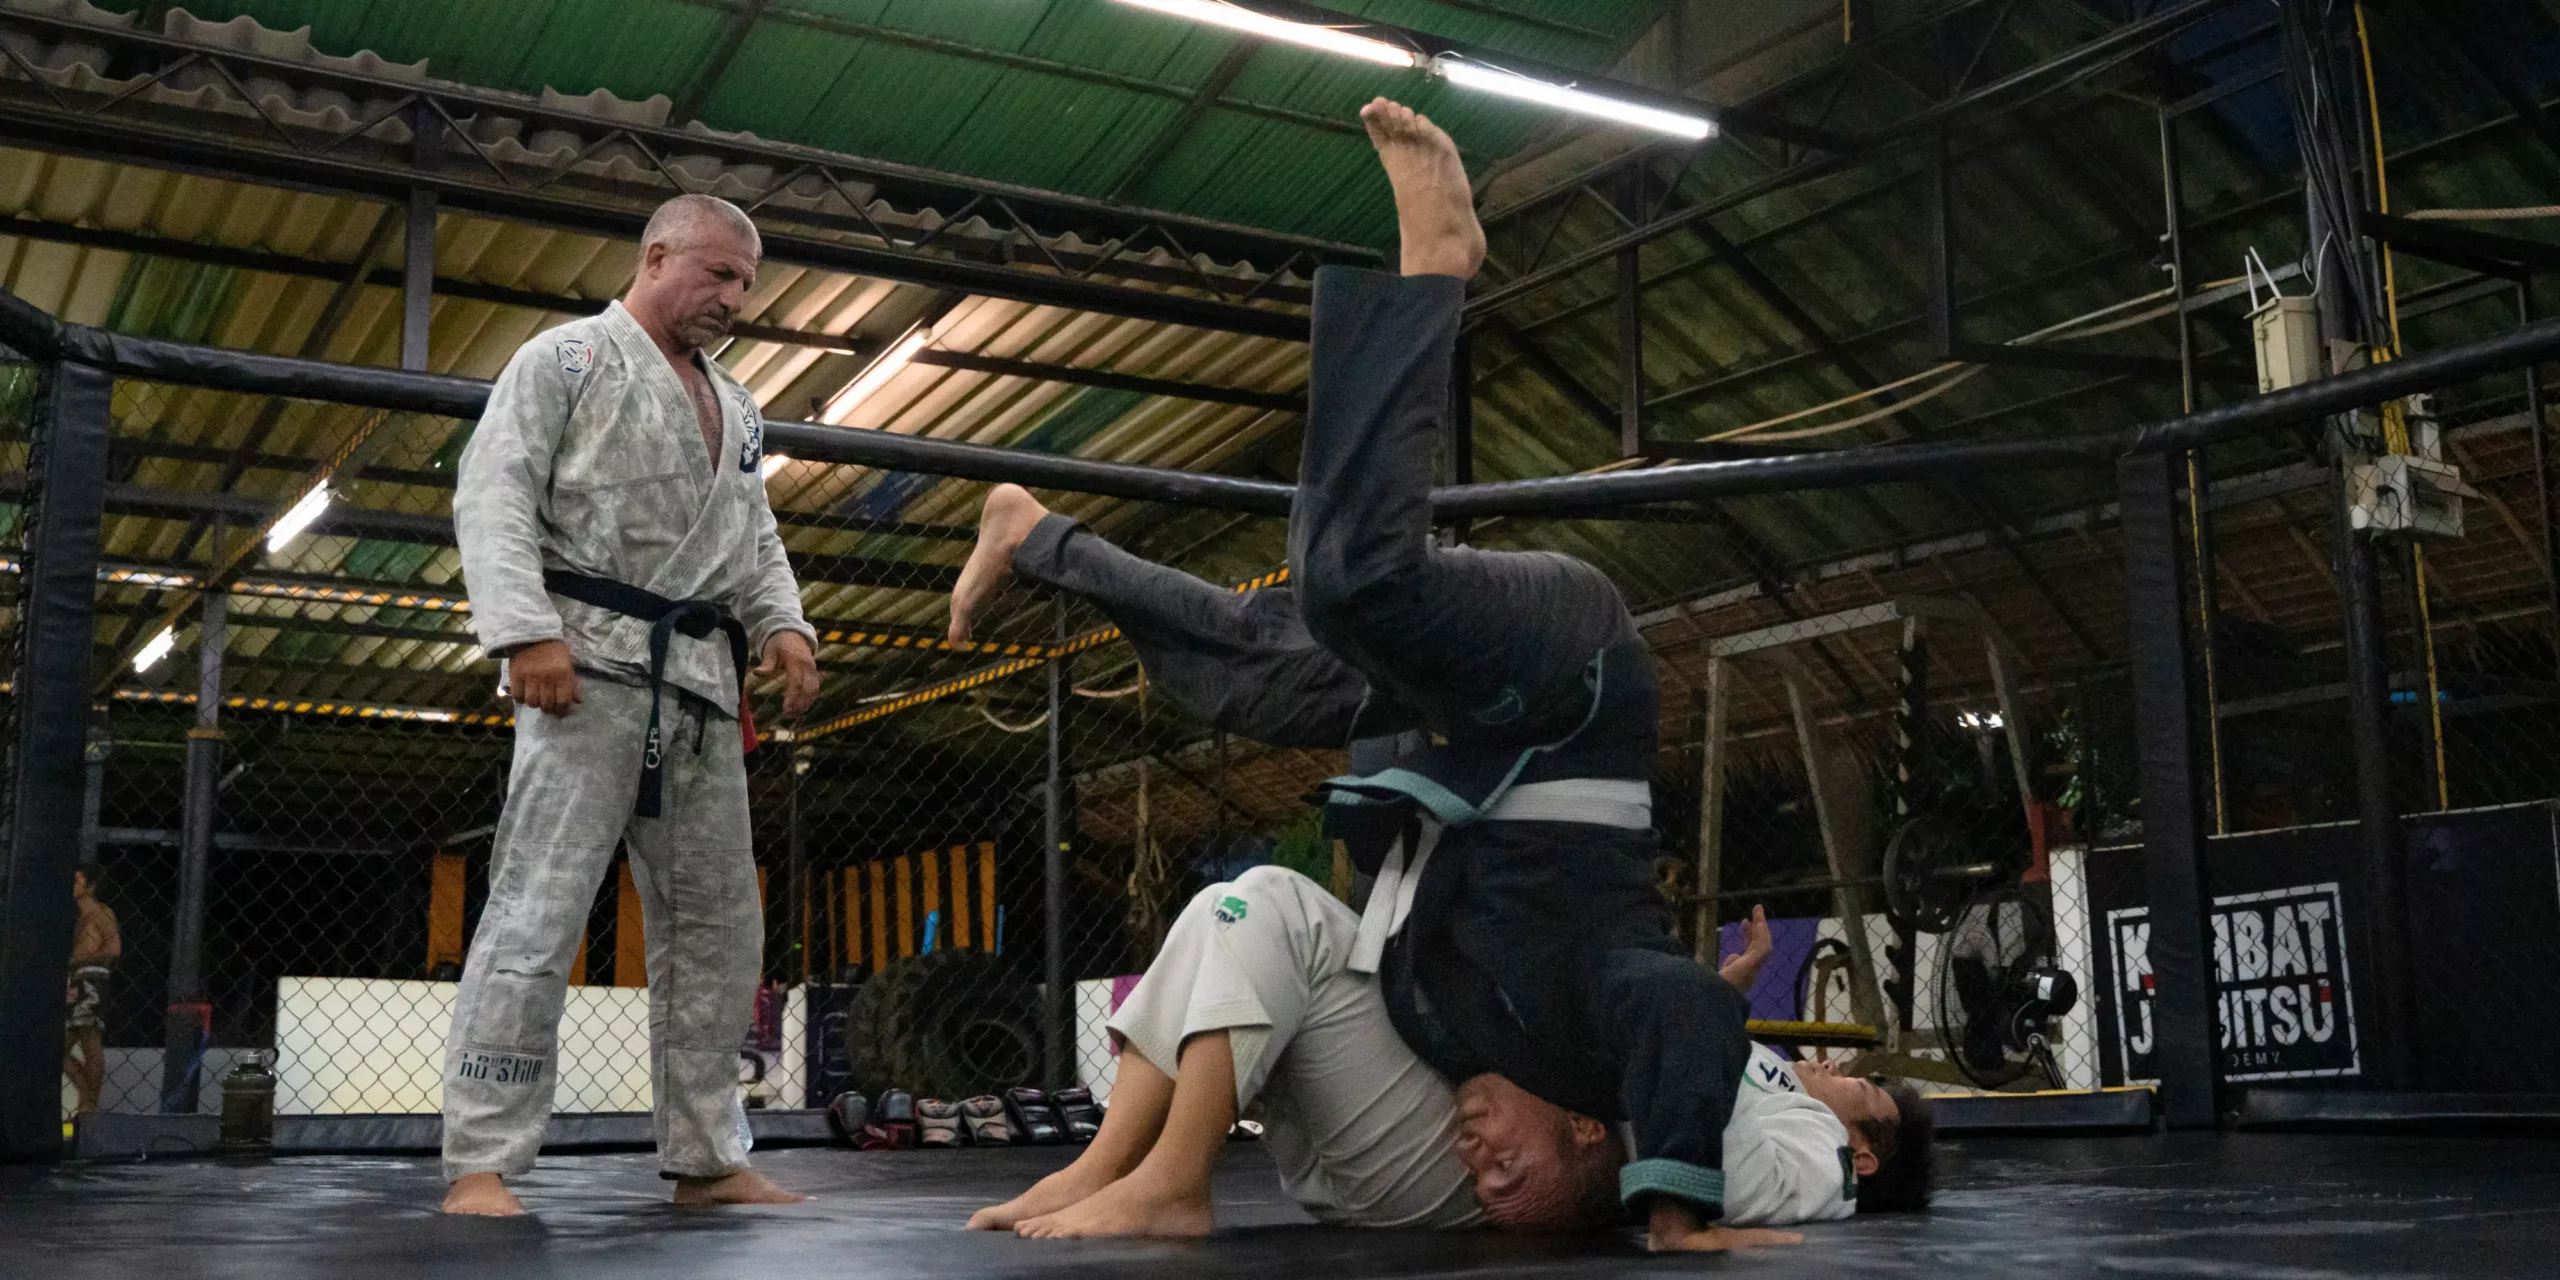 A Brazilian Jiu-Jitsu instructor observes two students, one executing an inverted guard maneuver while the other attempts to maintain position, in a dynamic training exercise on the mats.